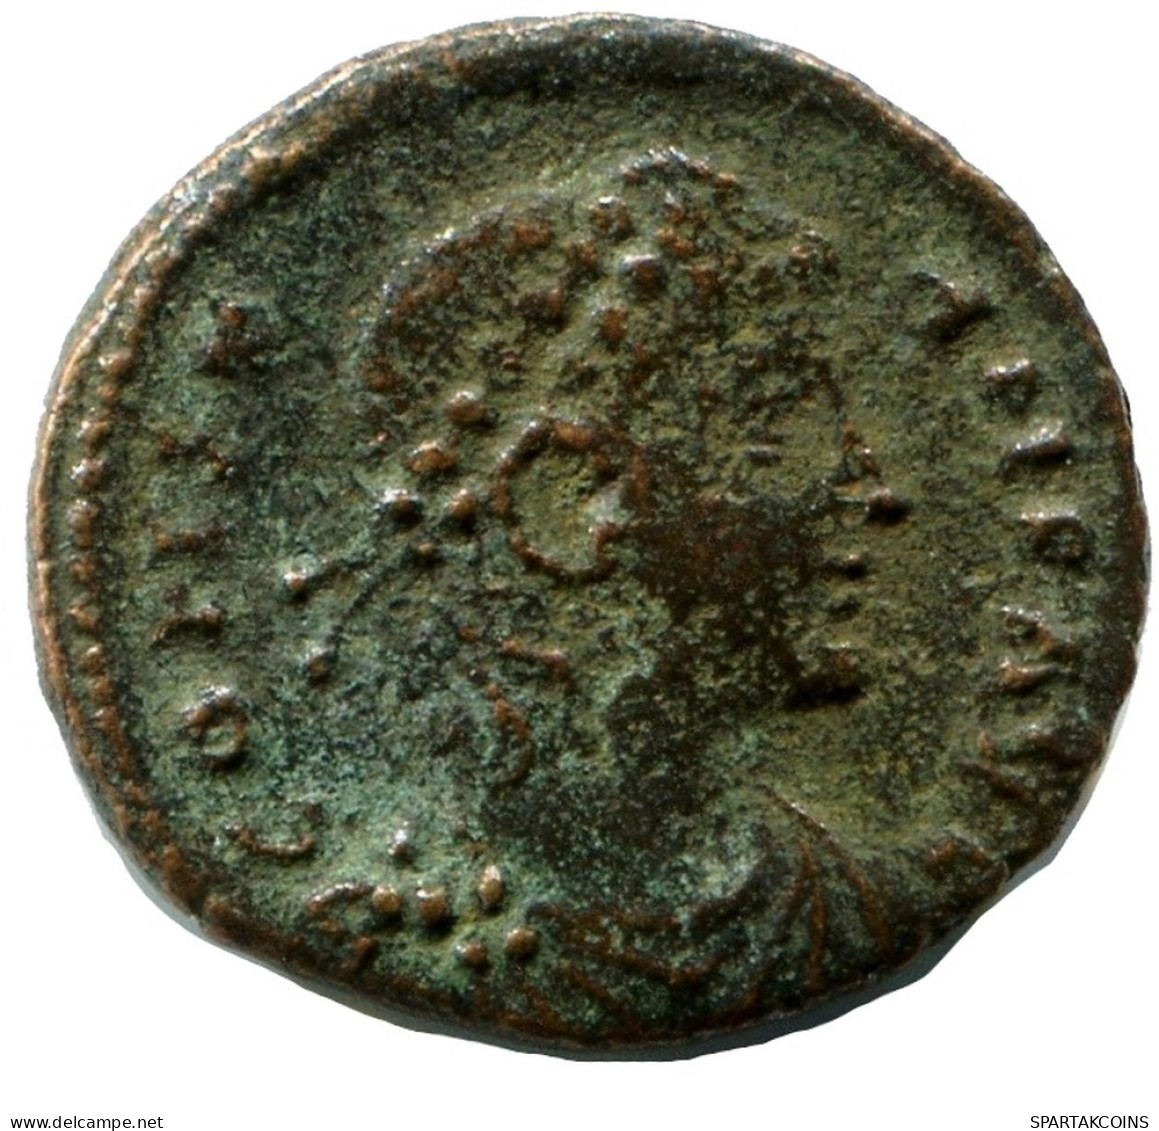 CONSTANS MINTED IN ALEKSANDRIA FROM THE ROYAL ONTARIO MUSEUM #ANC11448.14.E.A - The Christian Empire (307 AD To 363 AD)